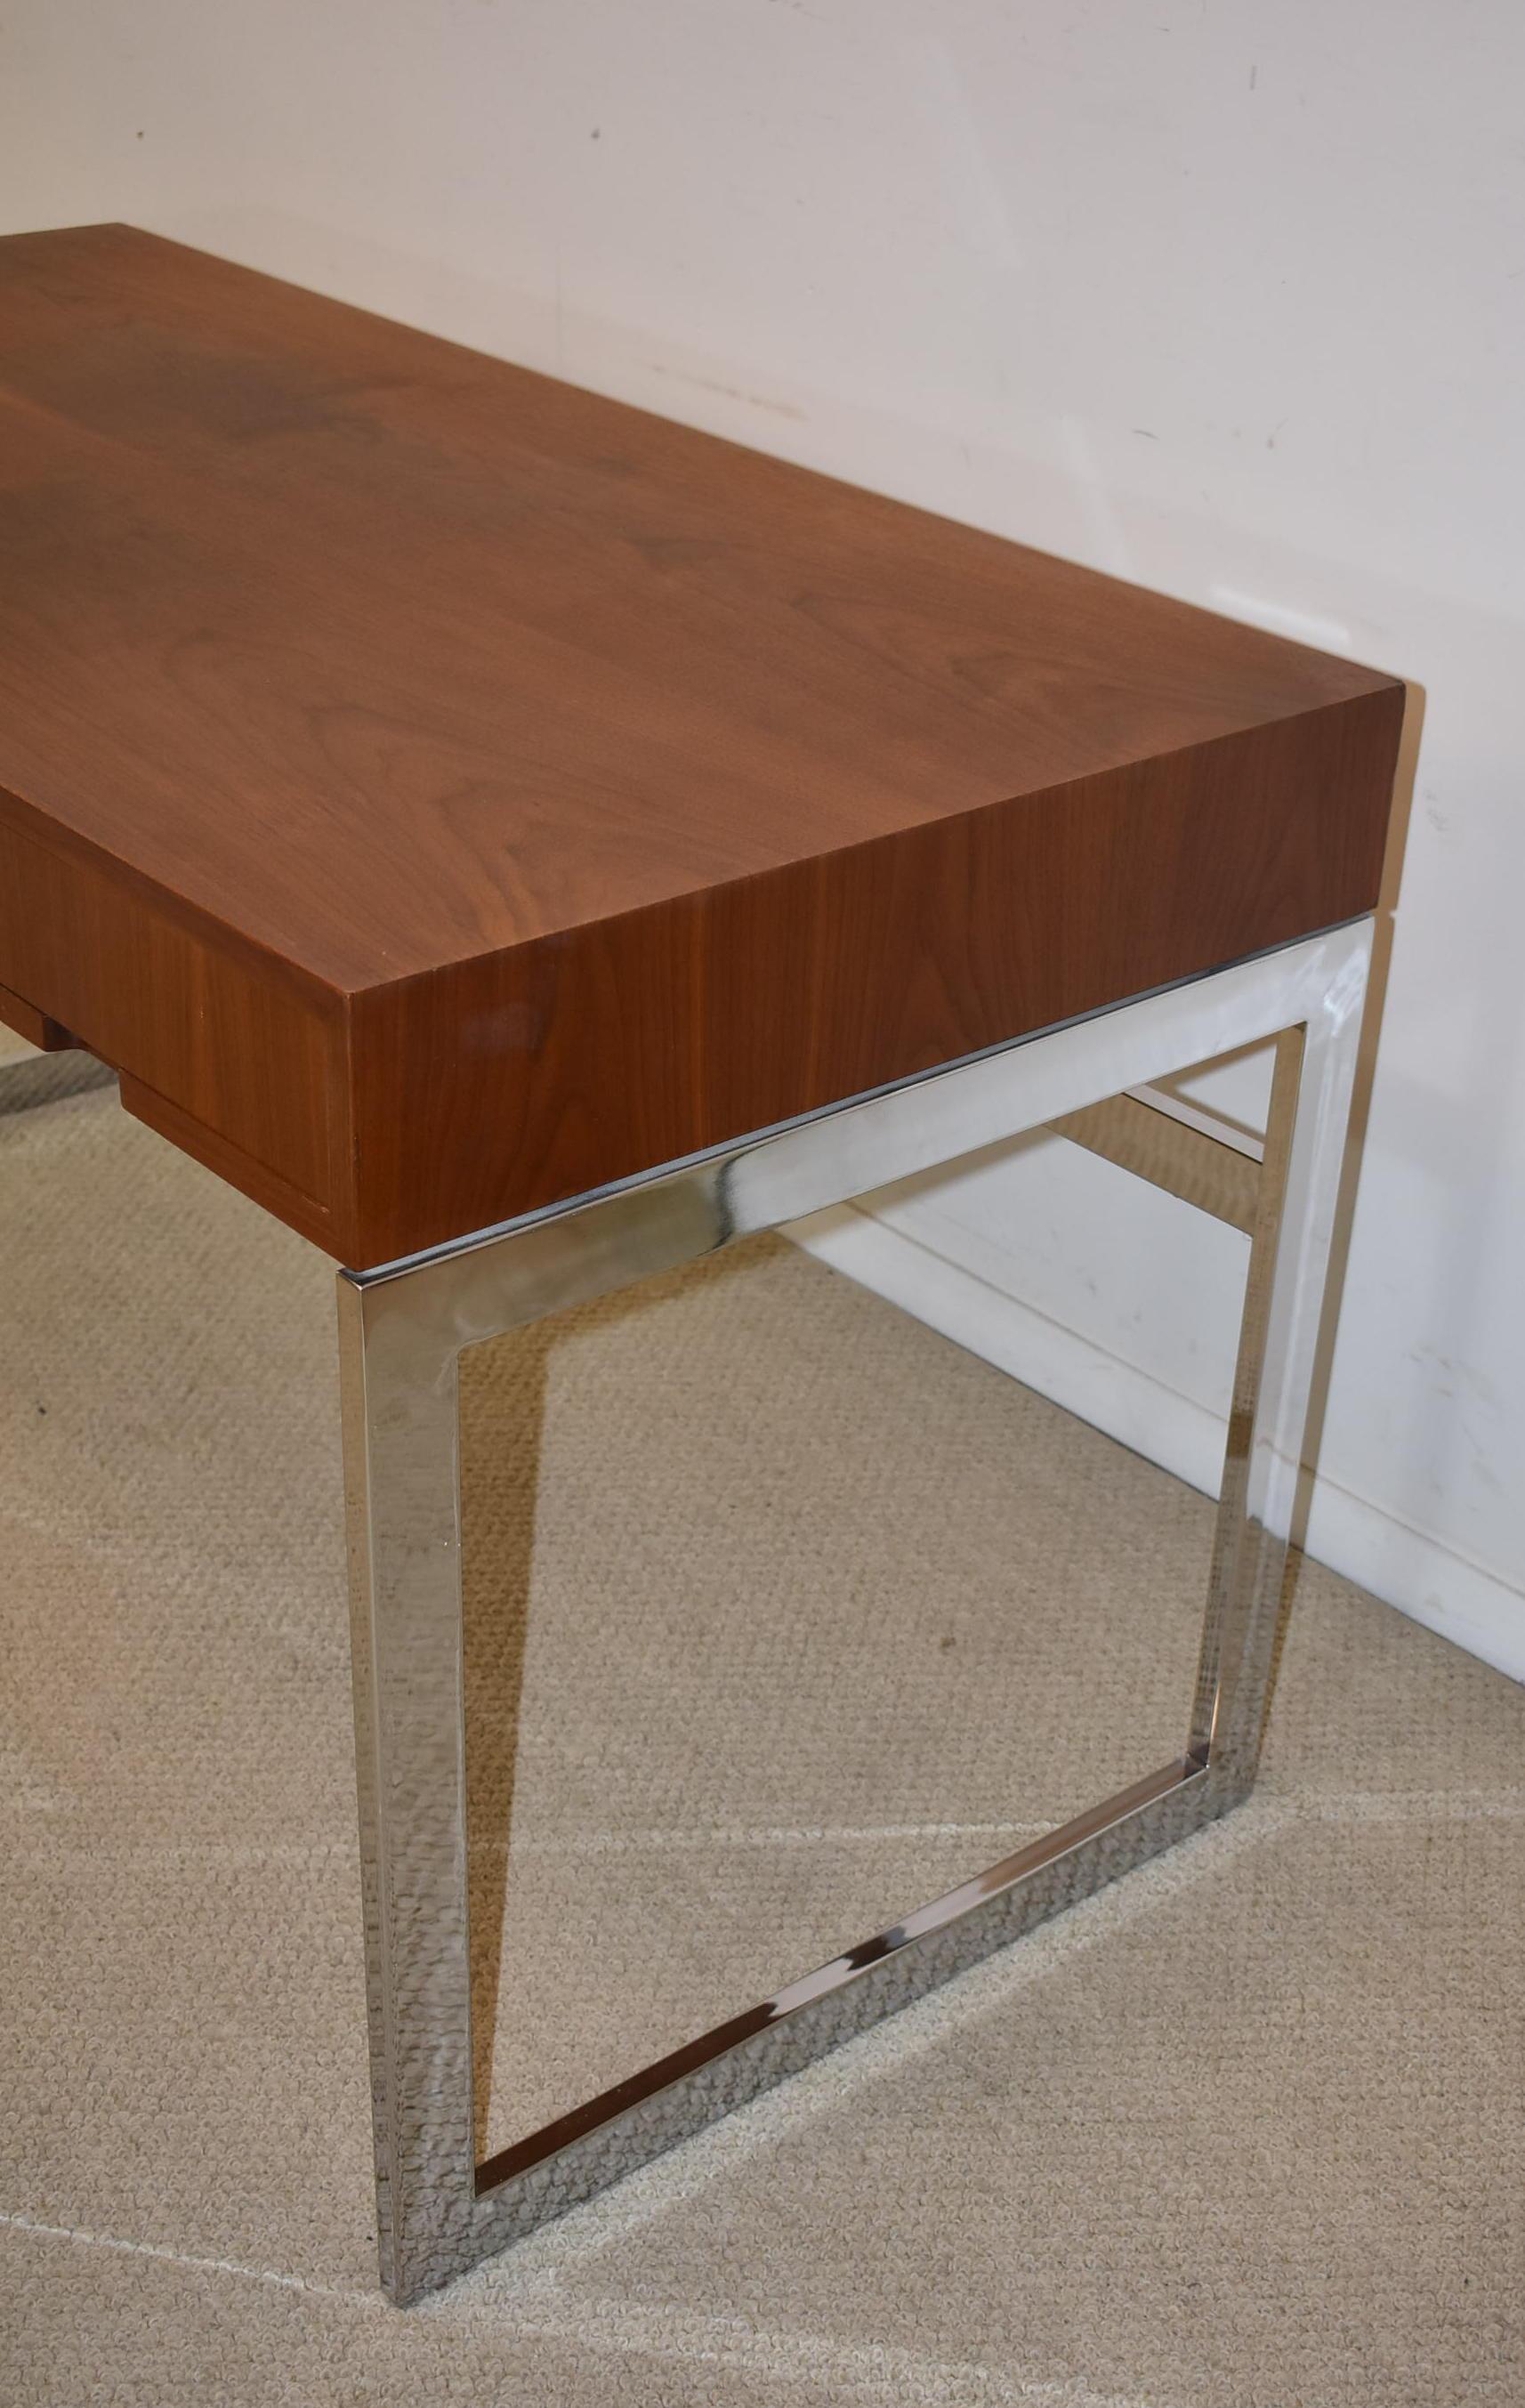 Mid-Century Modern three-drawer desk with chrome-plated frame with teak top. Drawers are lined in mahogany.